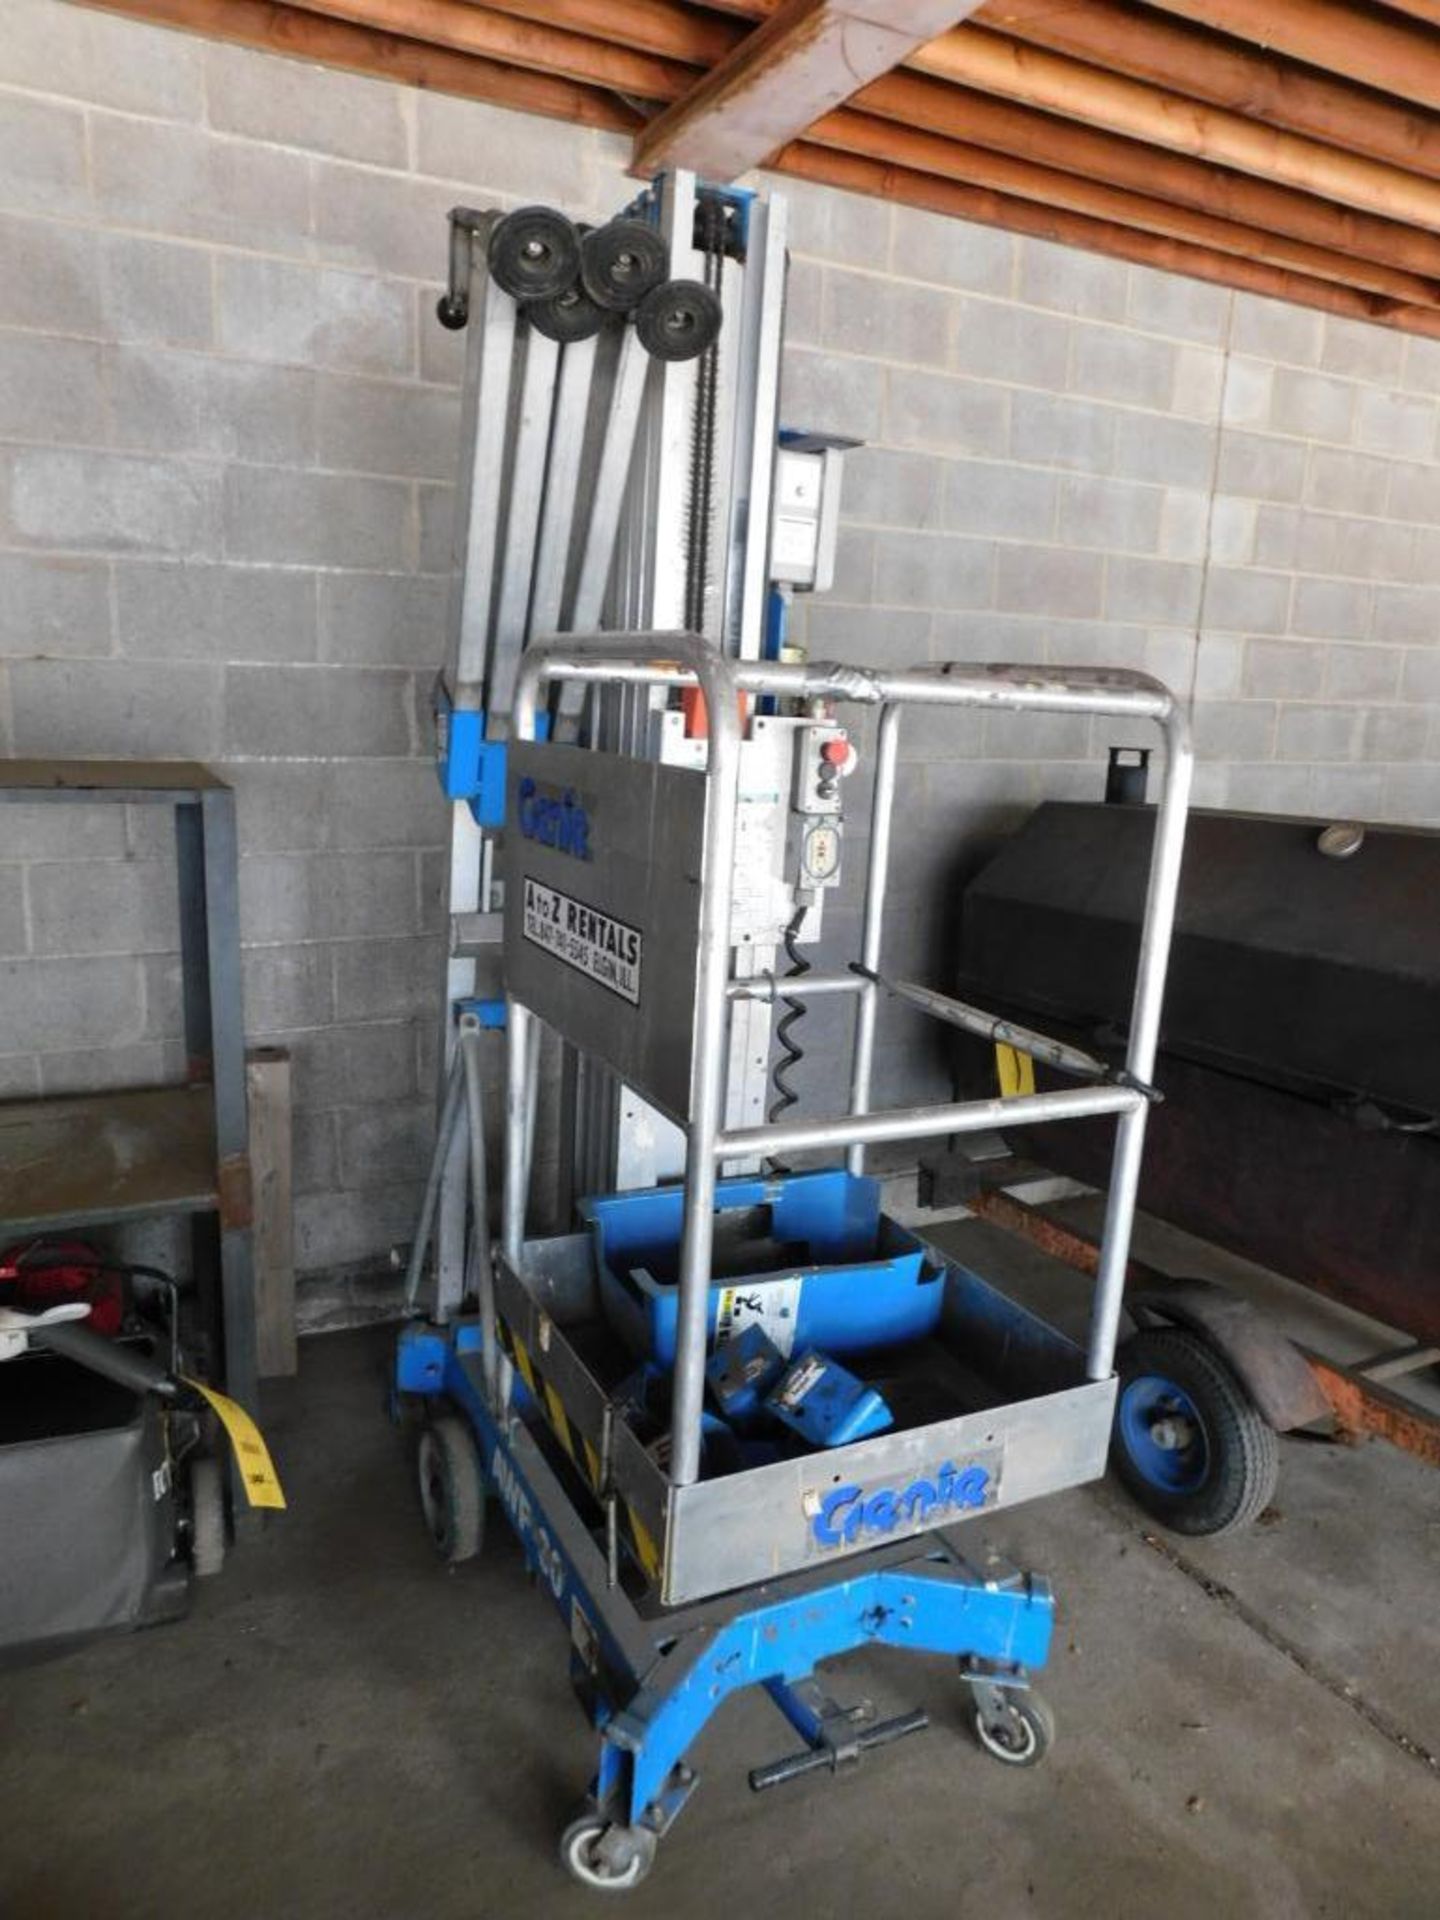 Genie AWP-30 One Man DC Power Portable Aerial Work Platform, 30' Max Work Height, 300 Lb. Weight Cap - Image 6 of 18